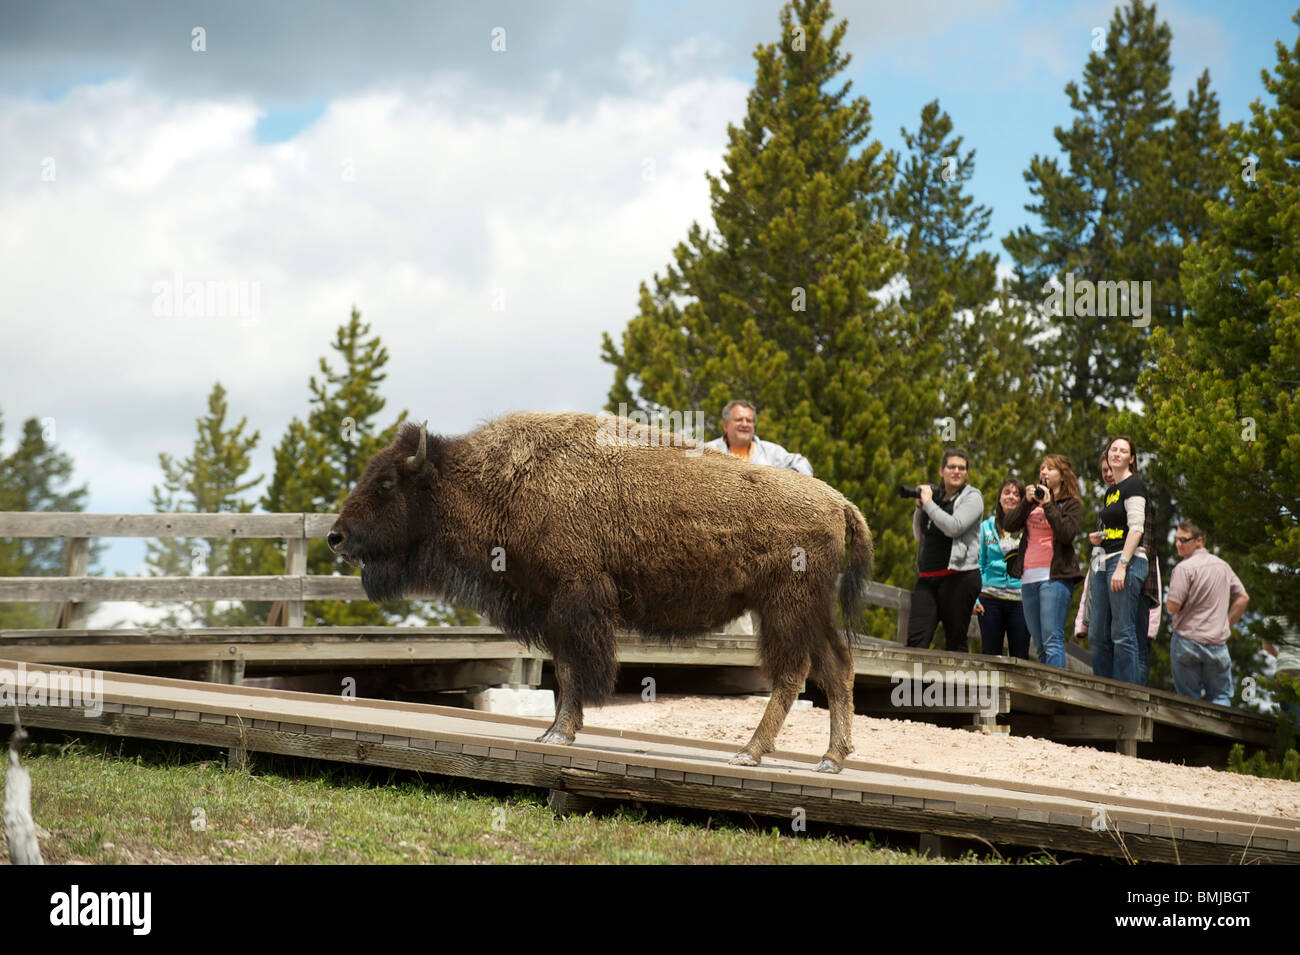 A Bison, or American Buffalo, walks near tourists in Yellowstone National Park. Wyoming, USA Stock Photo